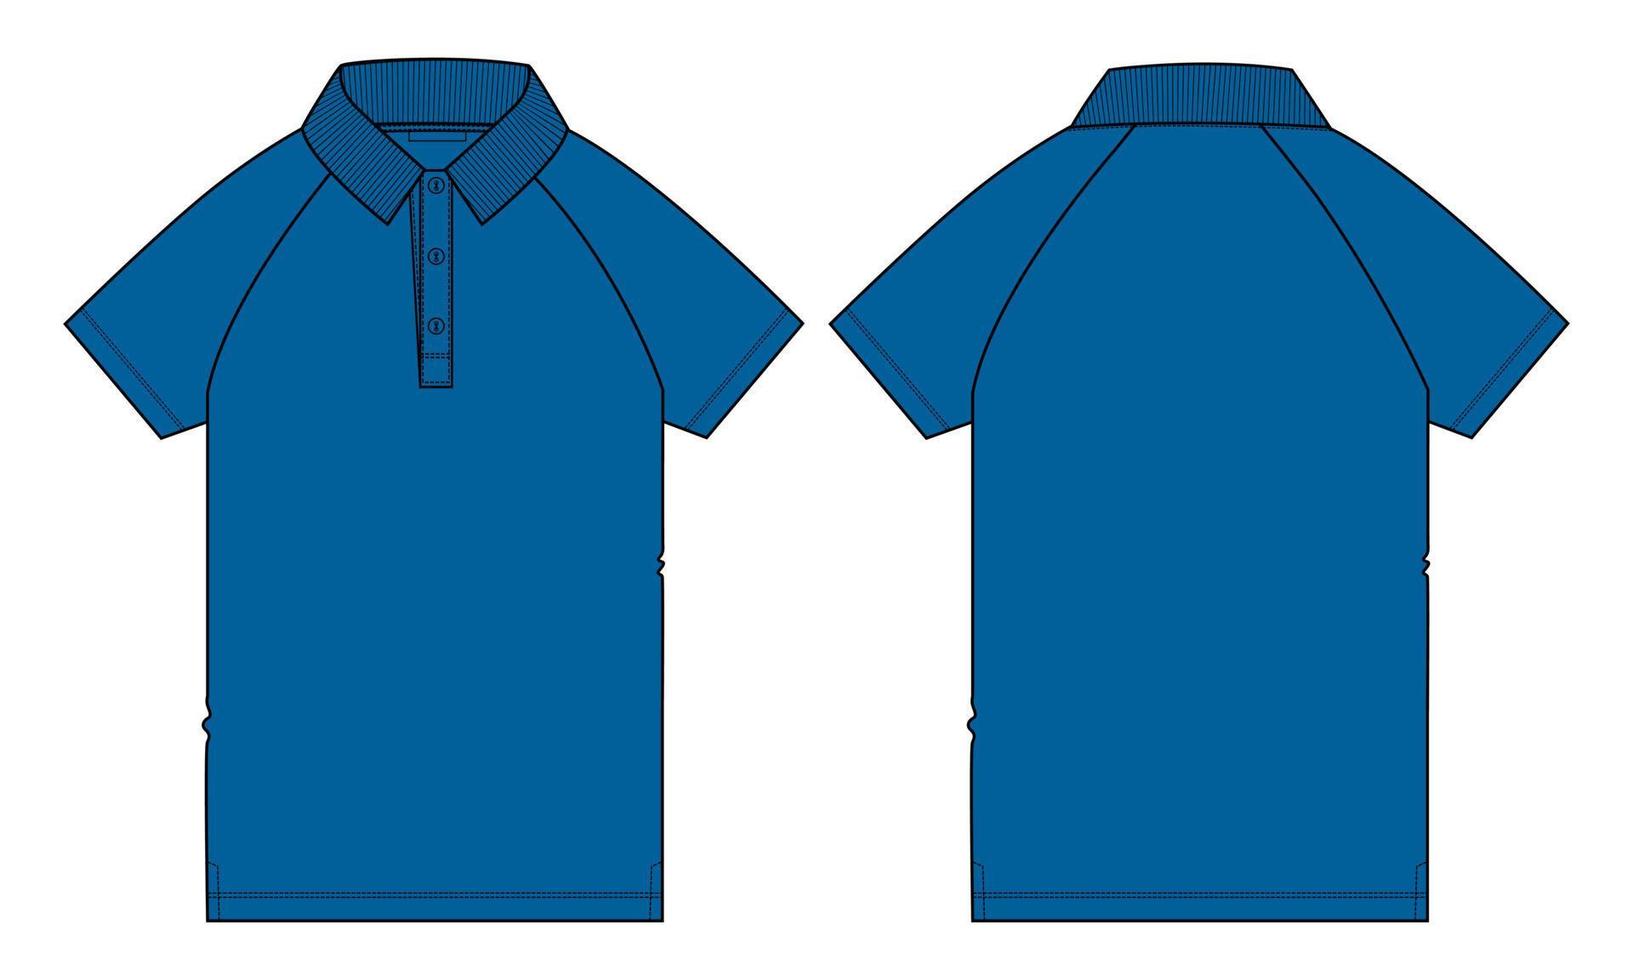 Short Sleeve Raglan Polo shirt Technical Fashion flat  sketch Vector illustration Blue Color template front and back views.